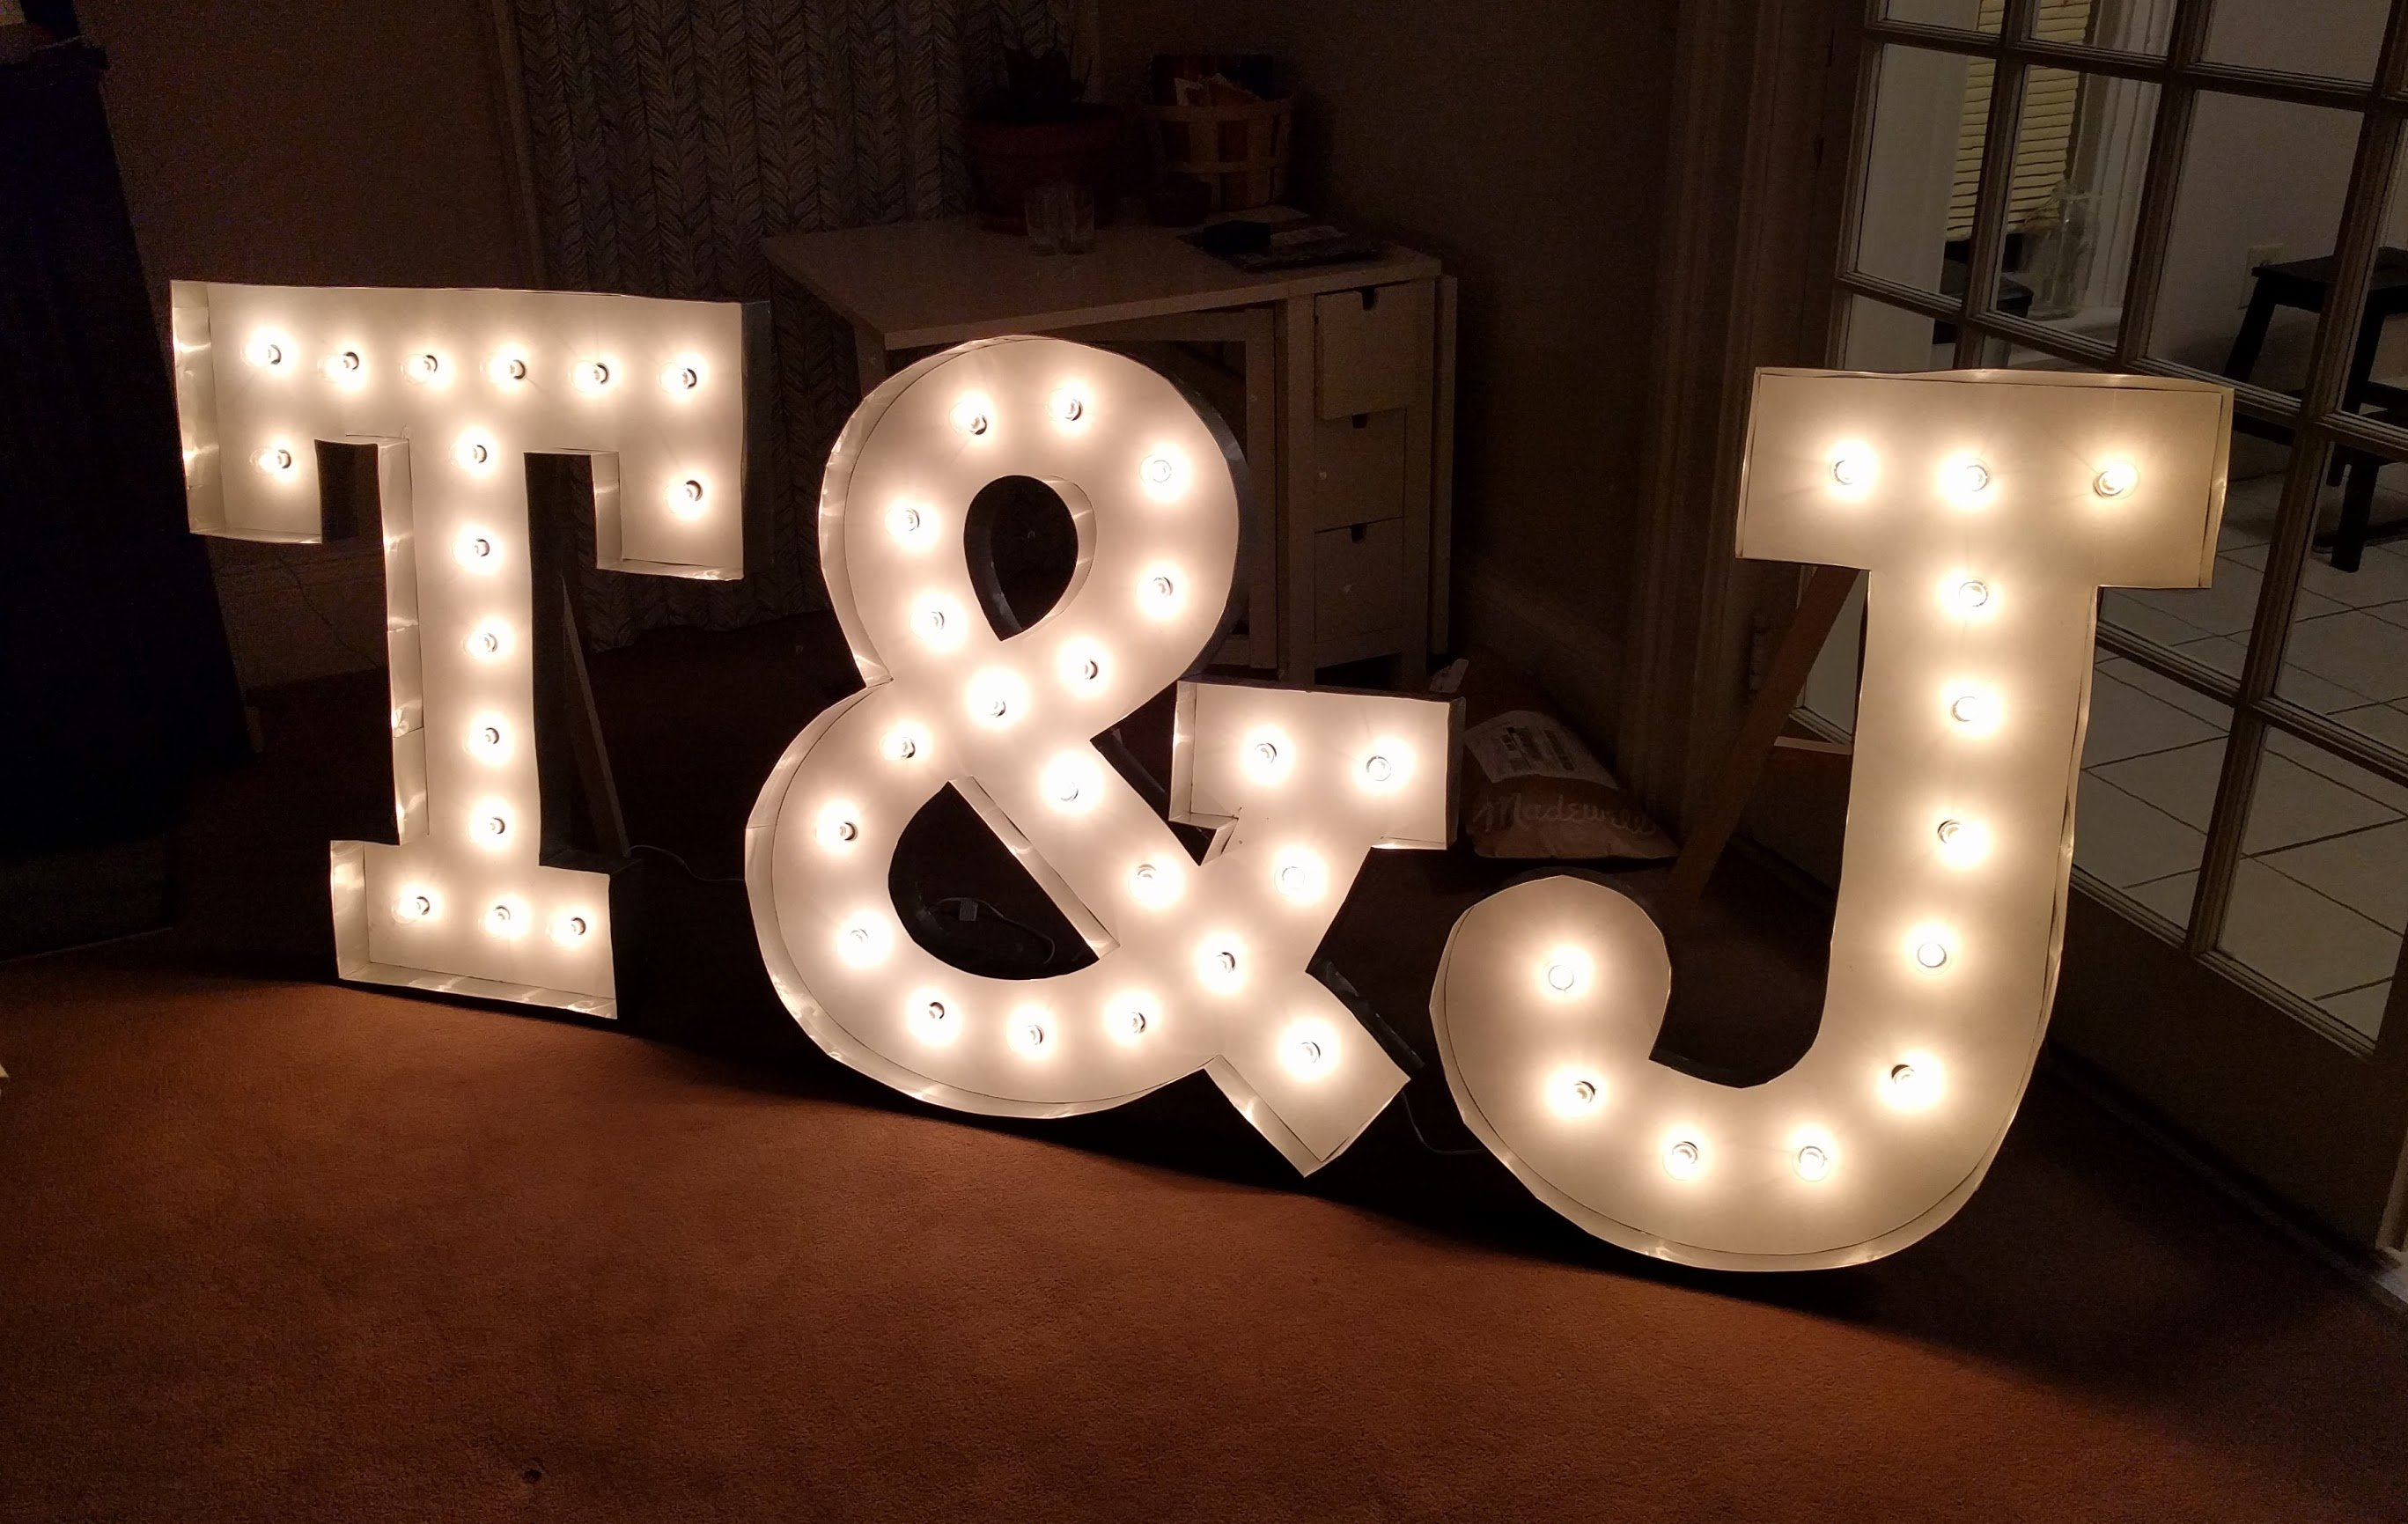 Lit marquee letters made from MDF and sheetmetal